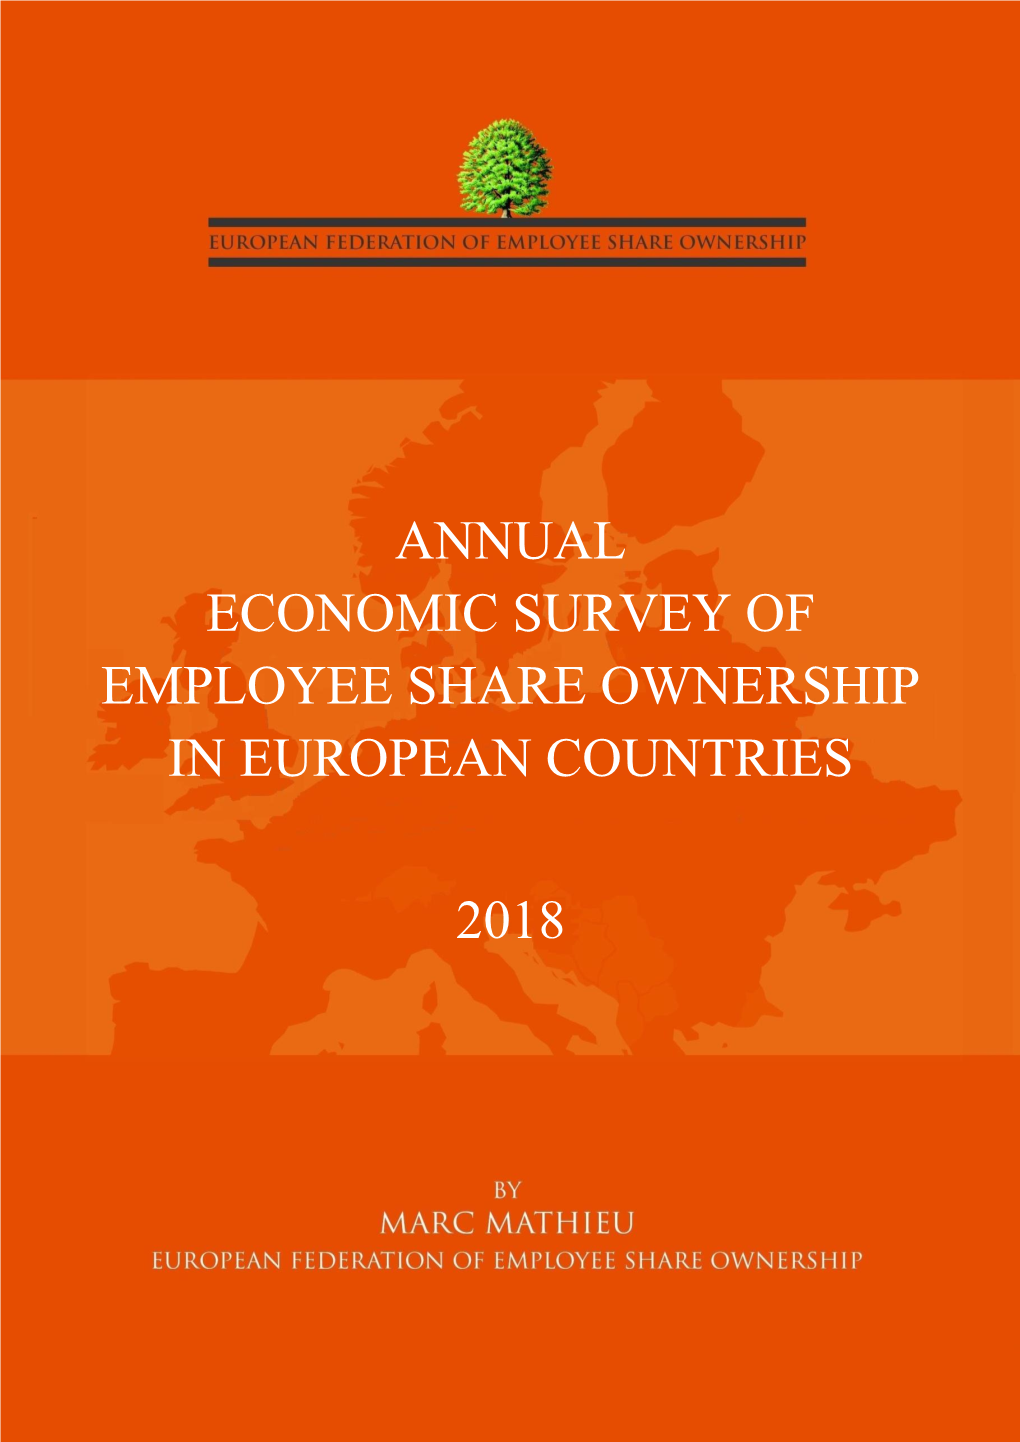 Annual Economic Survey of Employee Share Ownership in European Countries